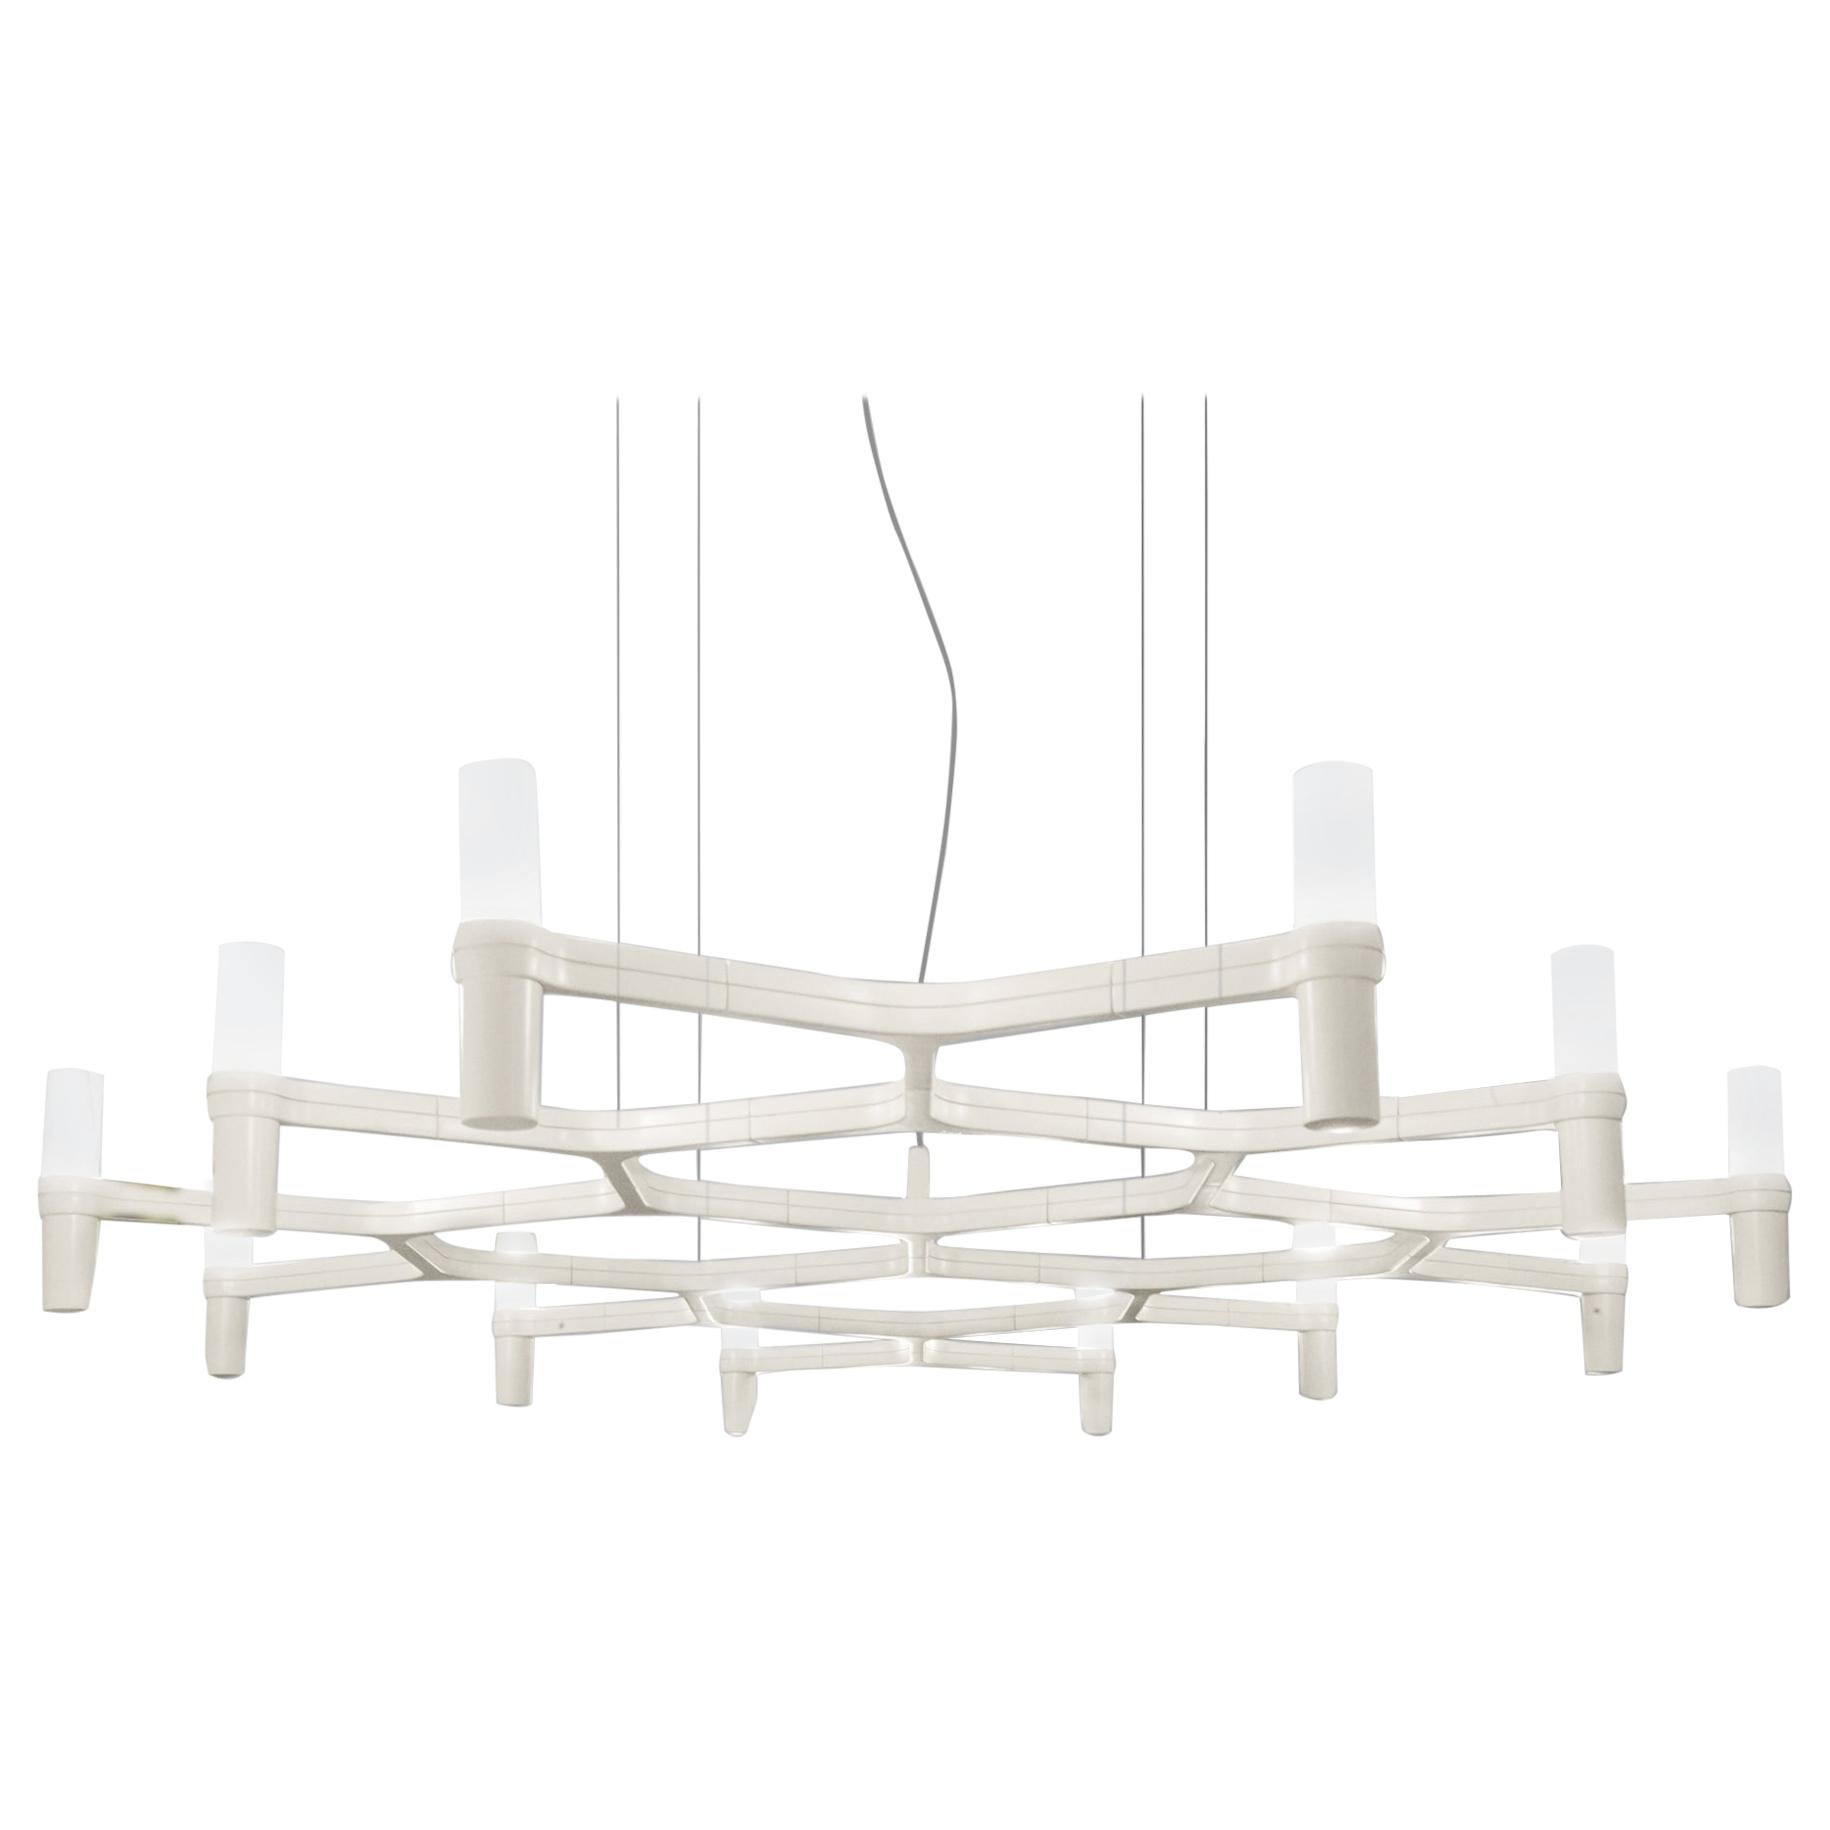 For Sale: White (White ) Nemo Crown Plana Mega Dimmable Pendant Chandeliers by Jehs + Laub